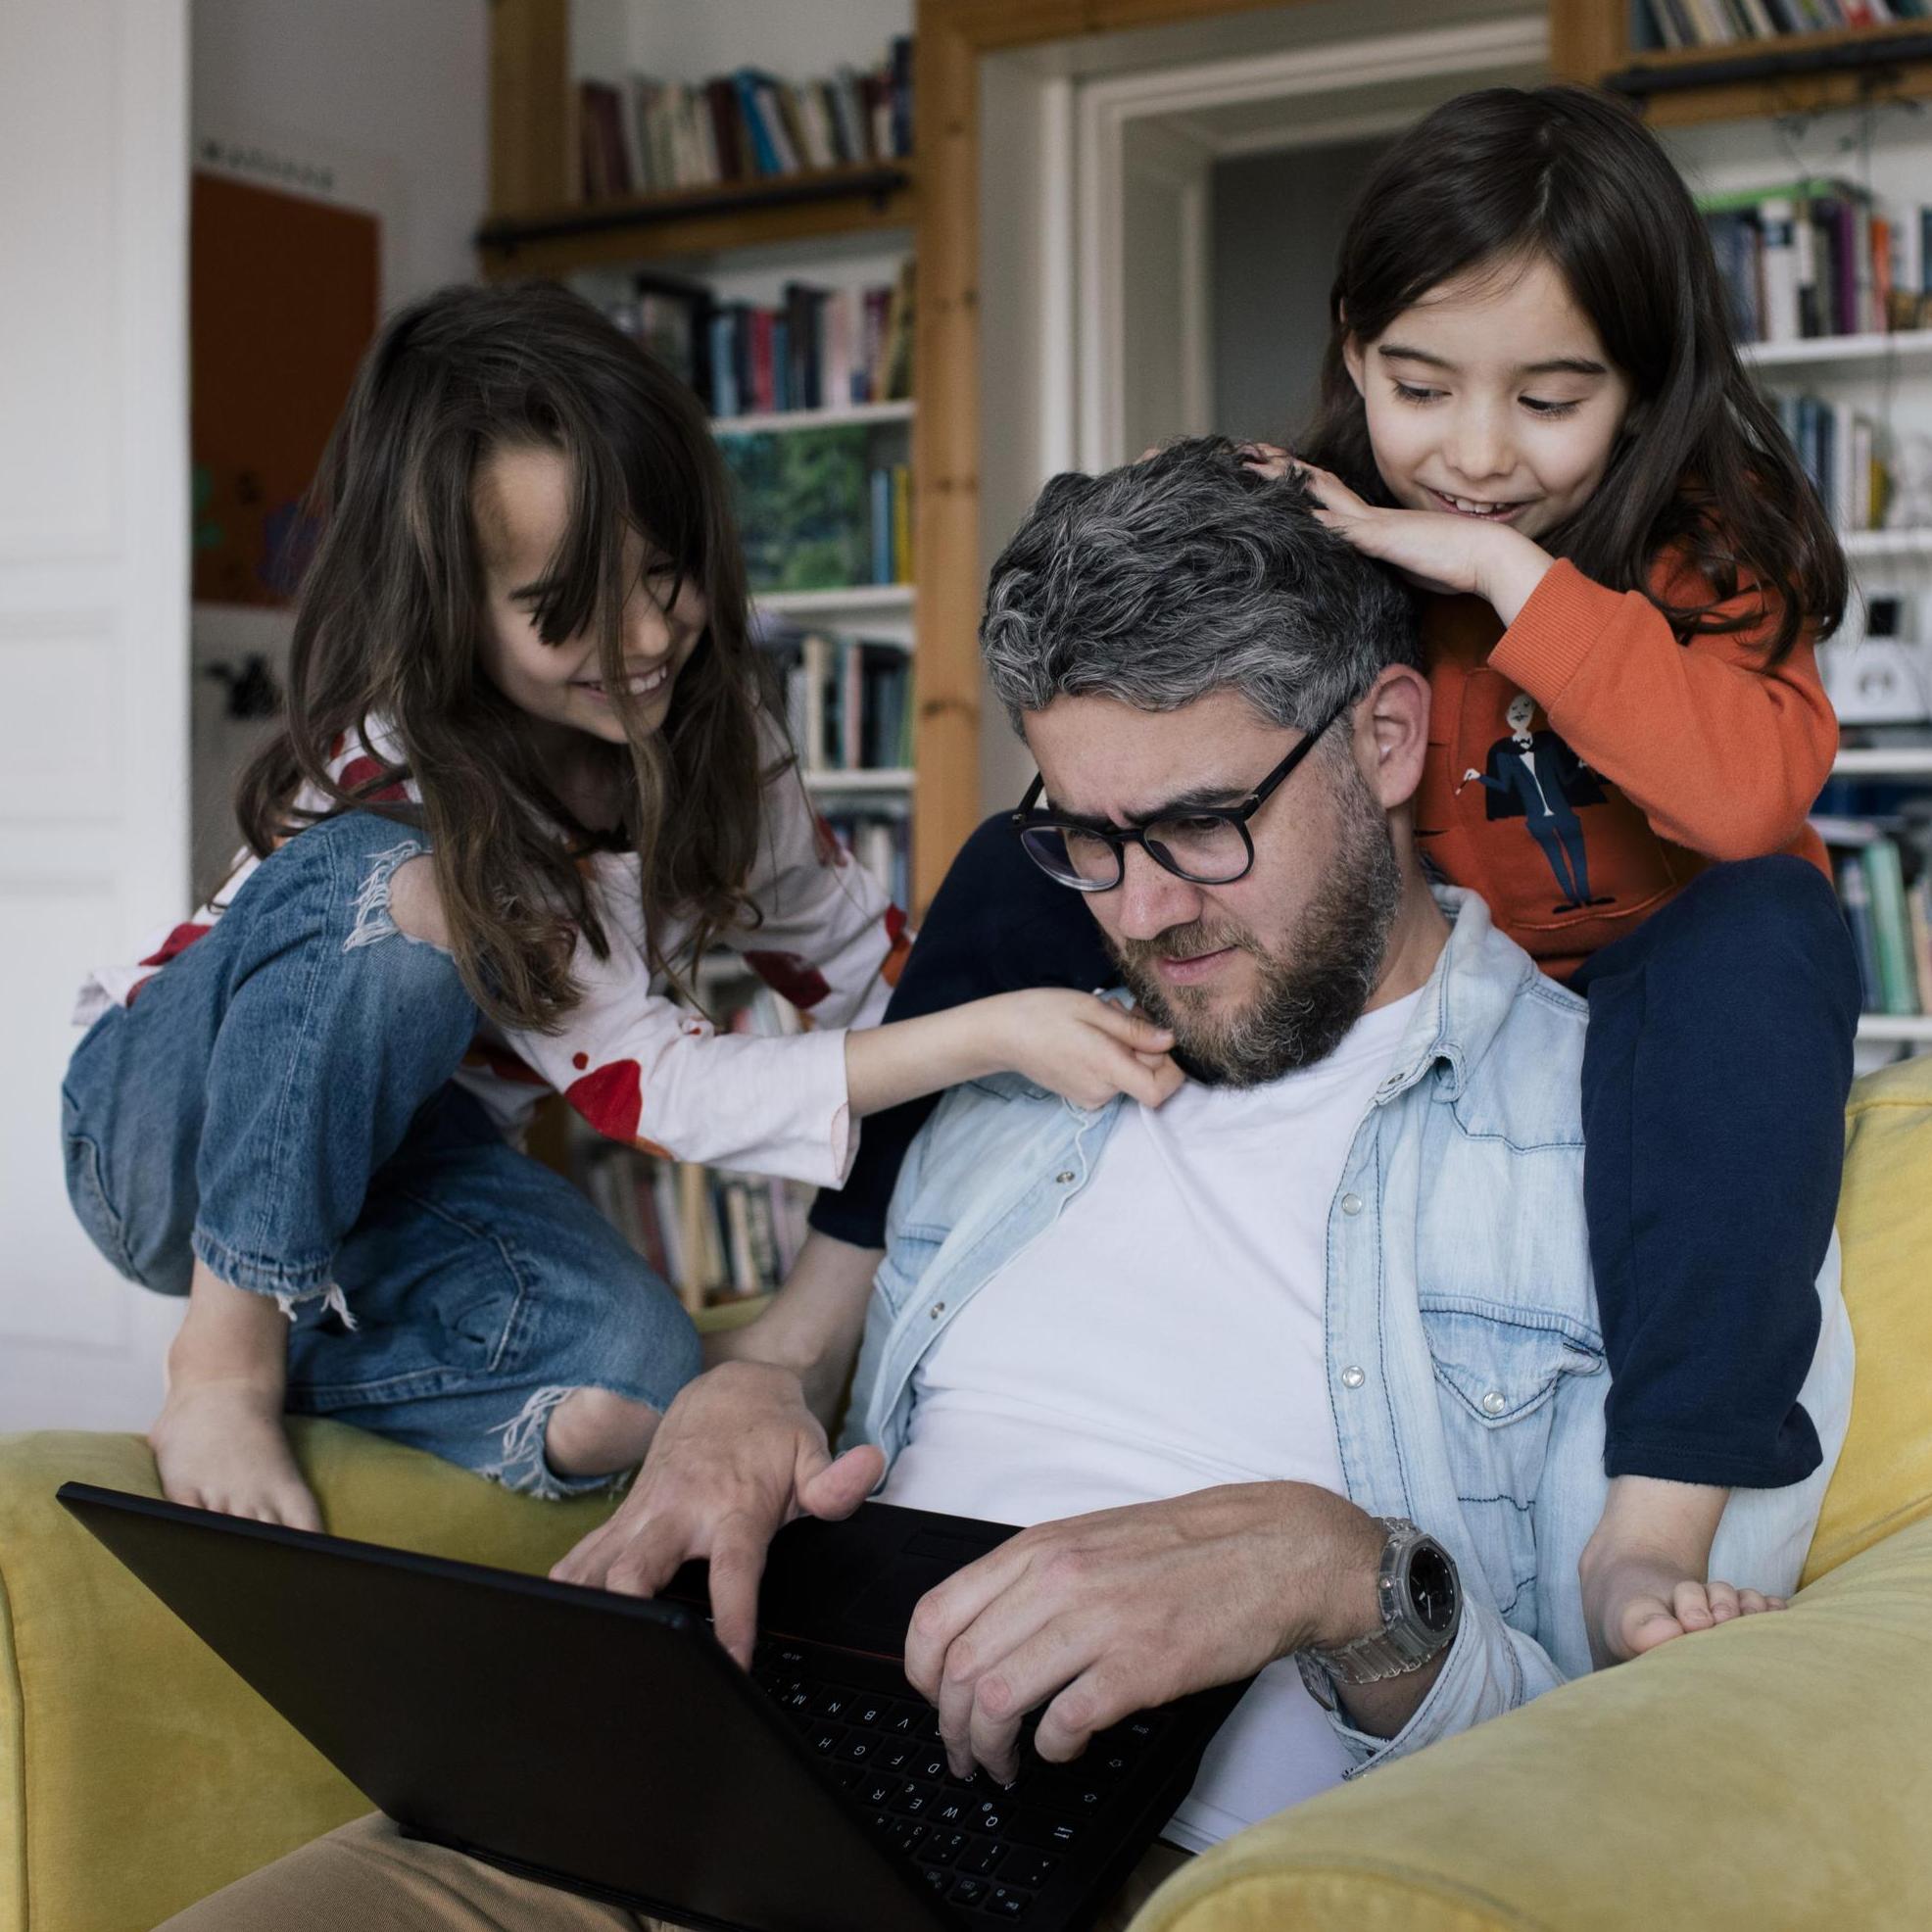 Dad looking at a laptop together with his kids